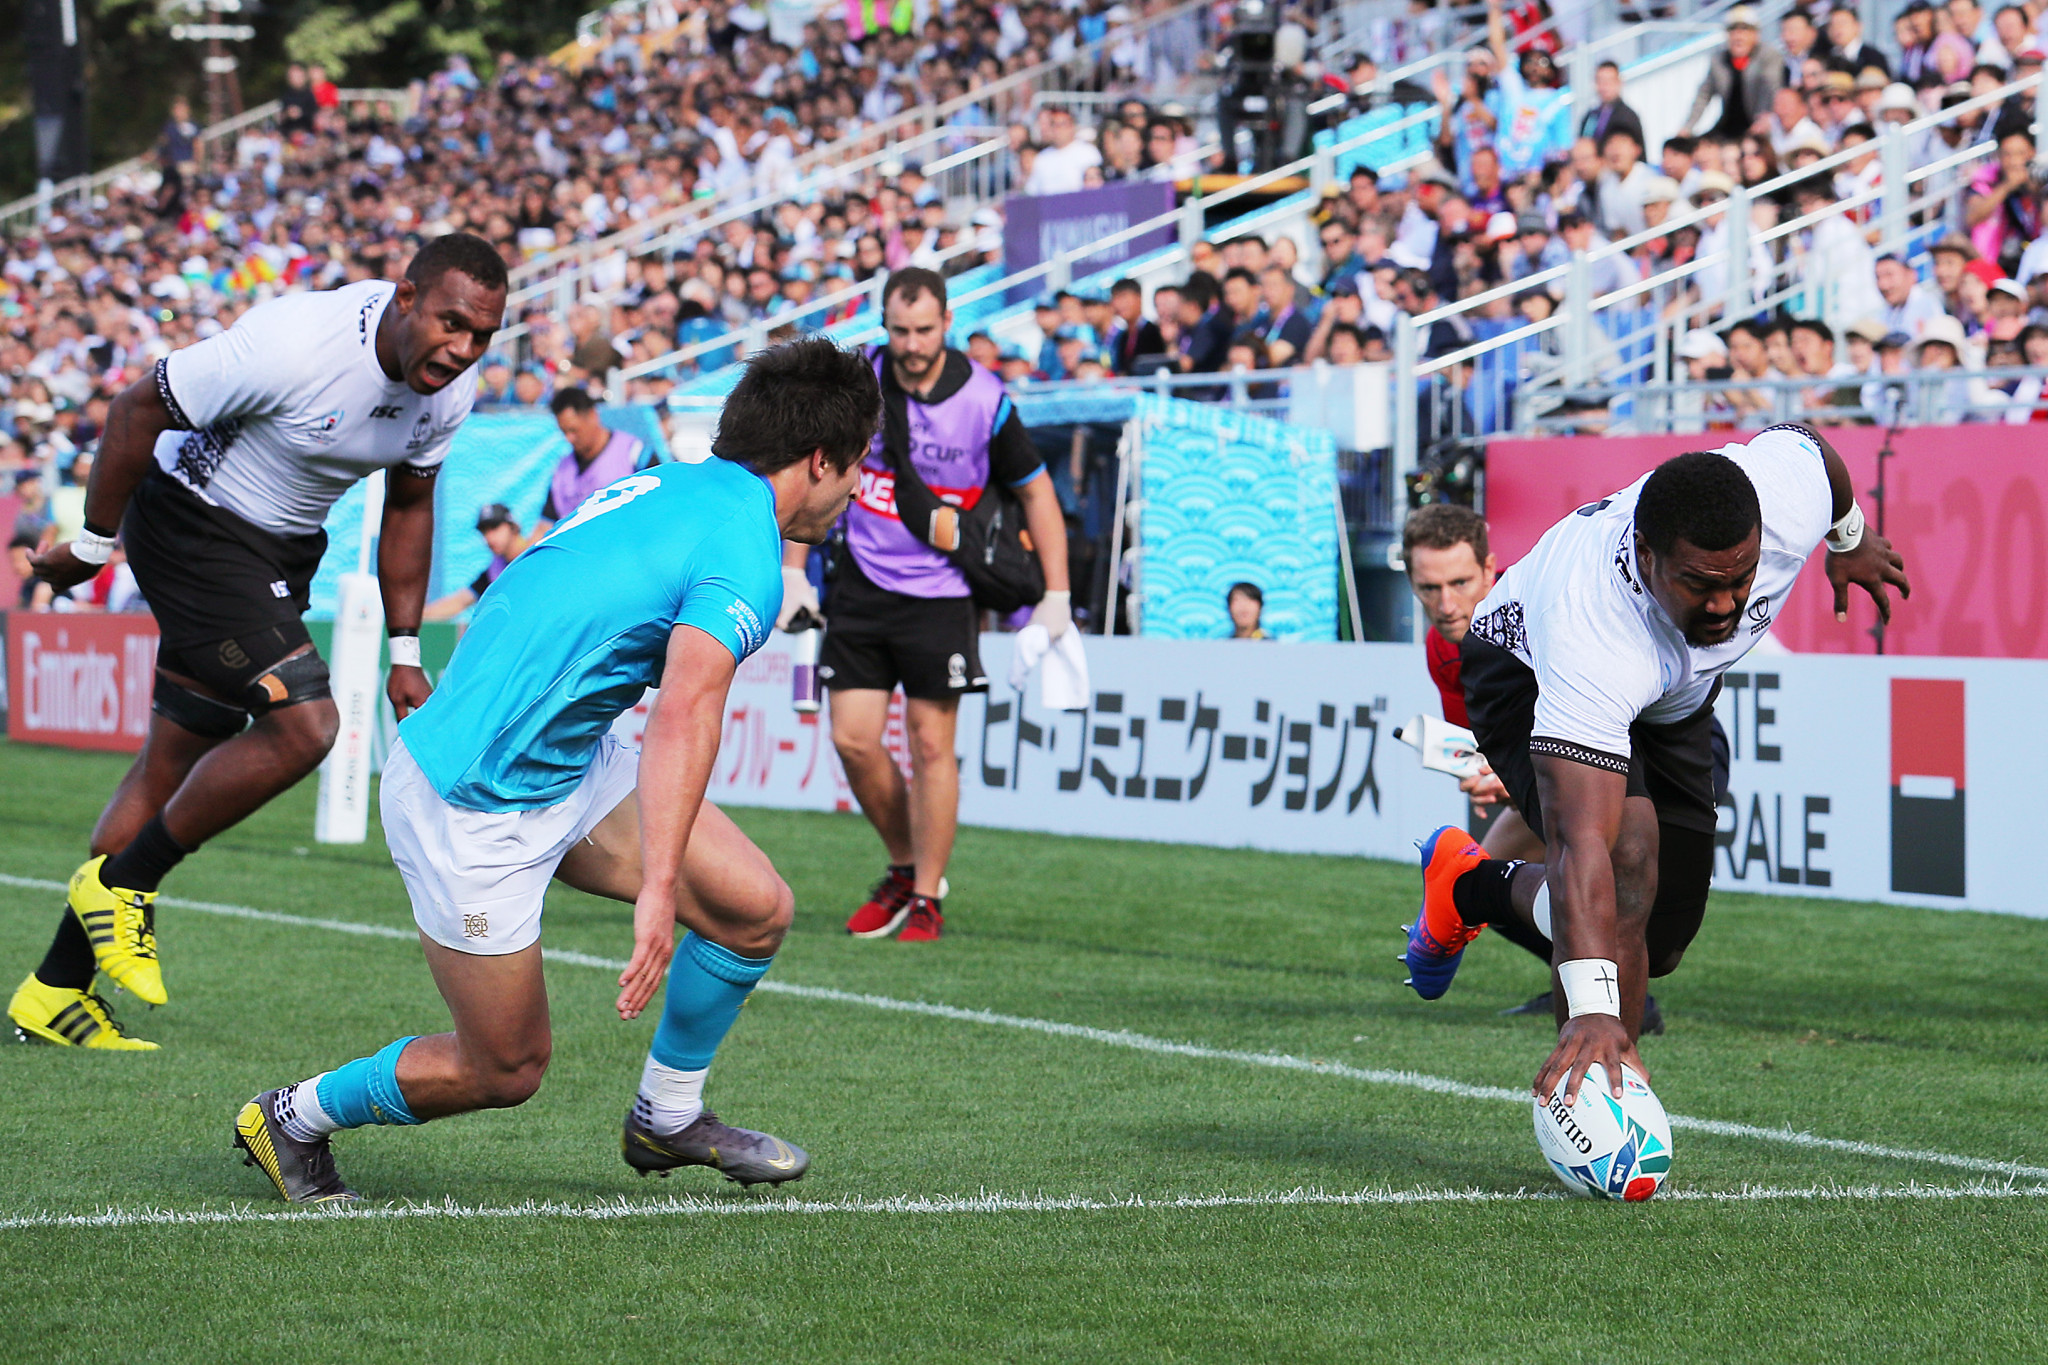 The game started brightly for Fiji, with Mesu Dolokoto's early try ©Getty Images